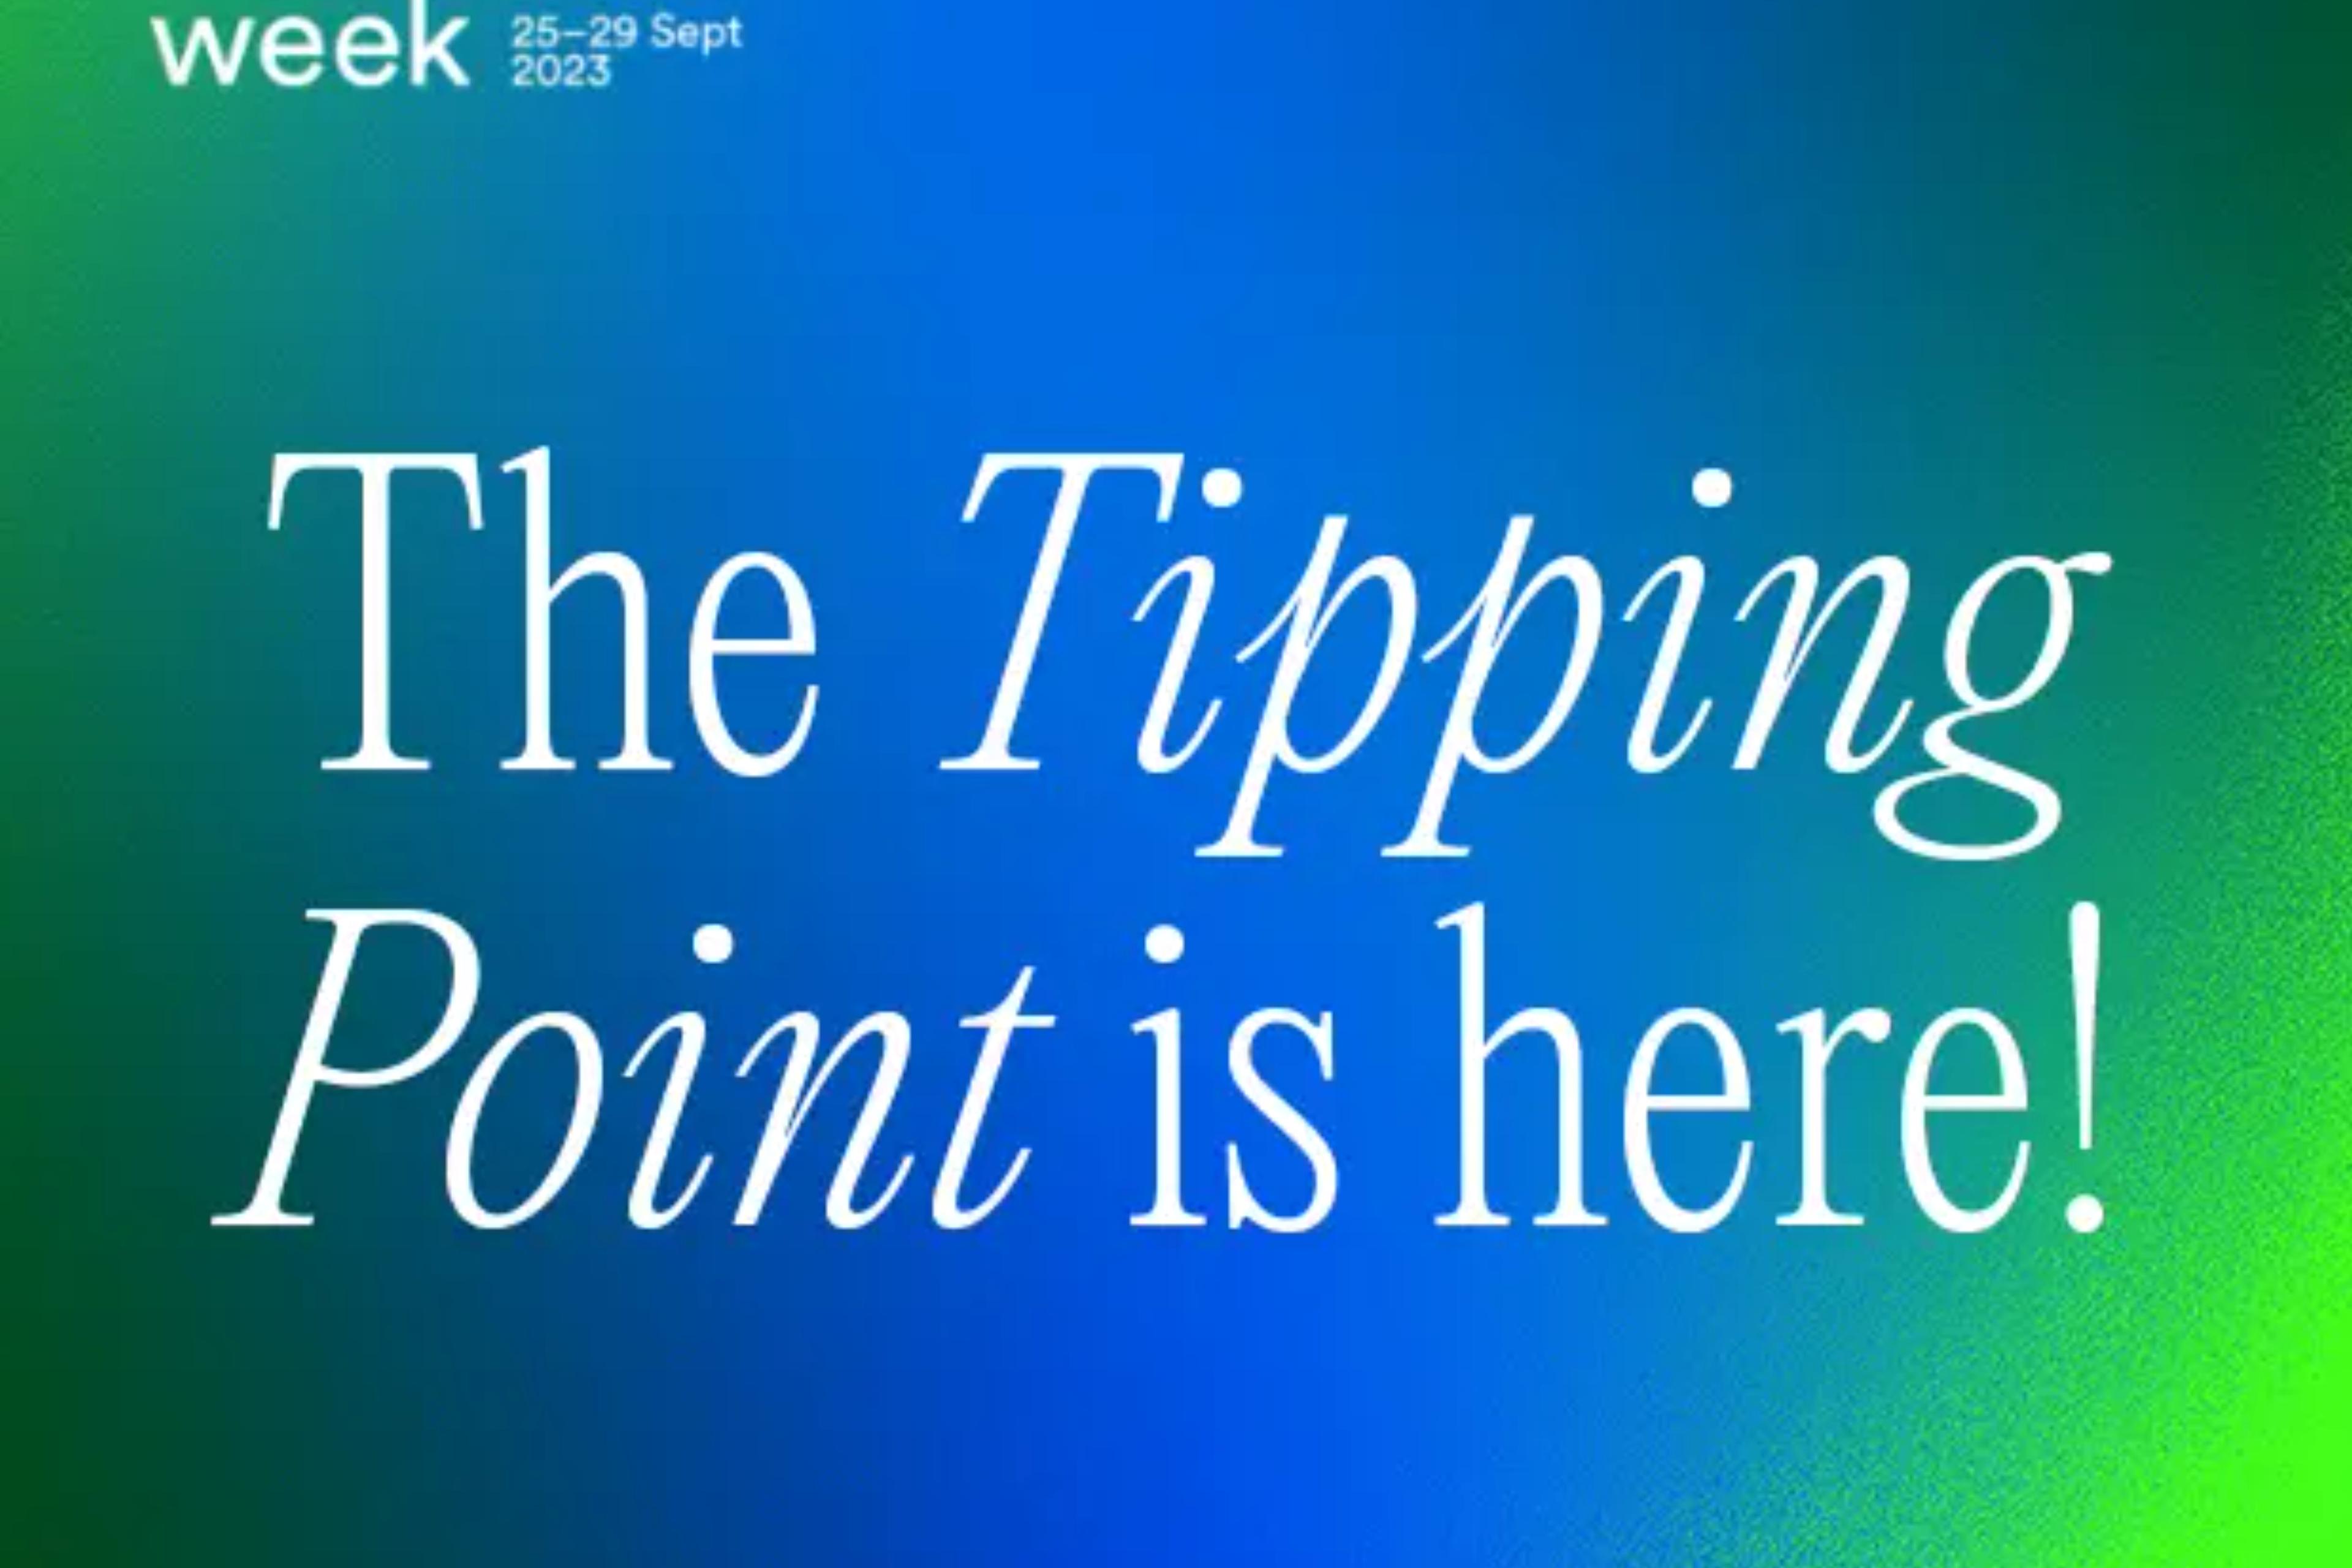 The Tipping Point is here